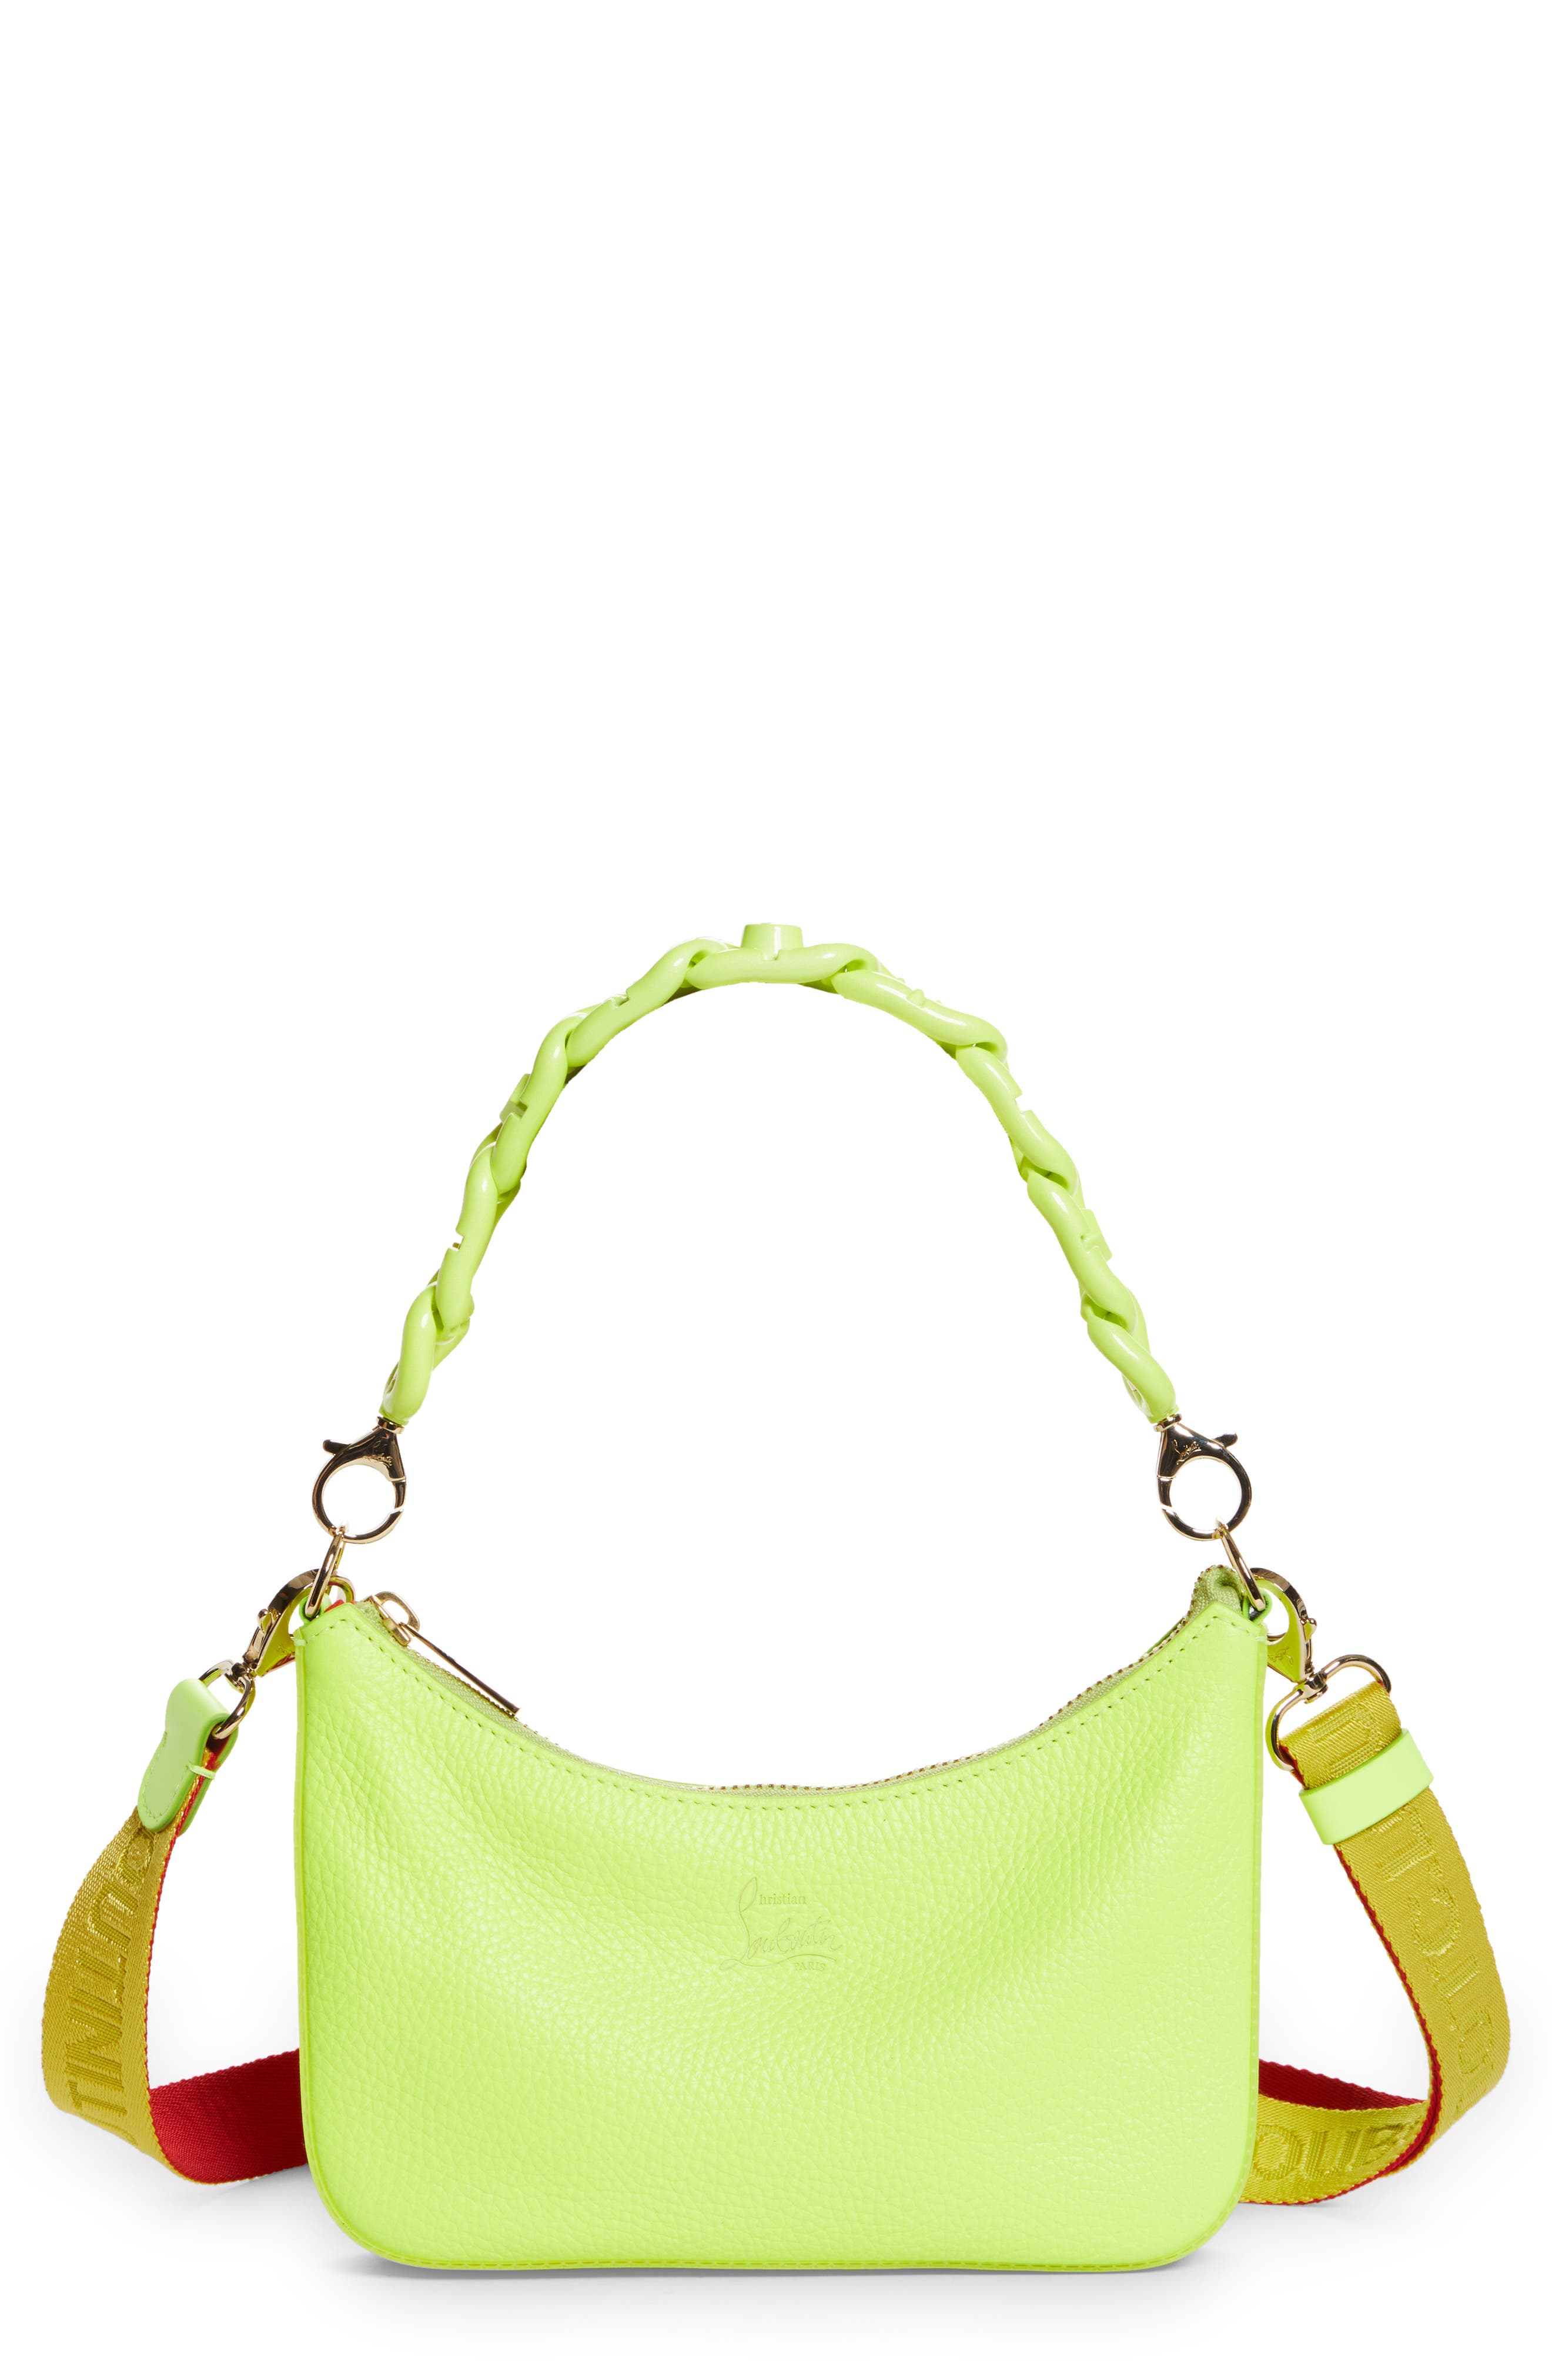 Christian Louboutin Cabata Spike-embellished Leather Cross-body Bag in  Yellow